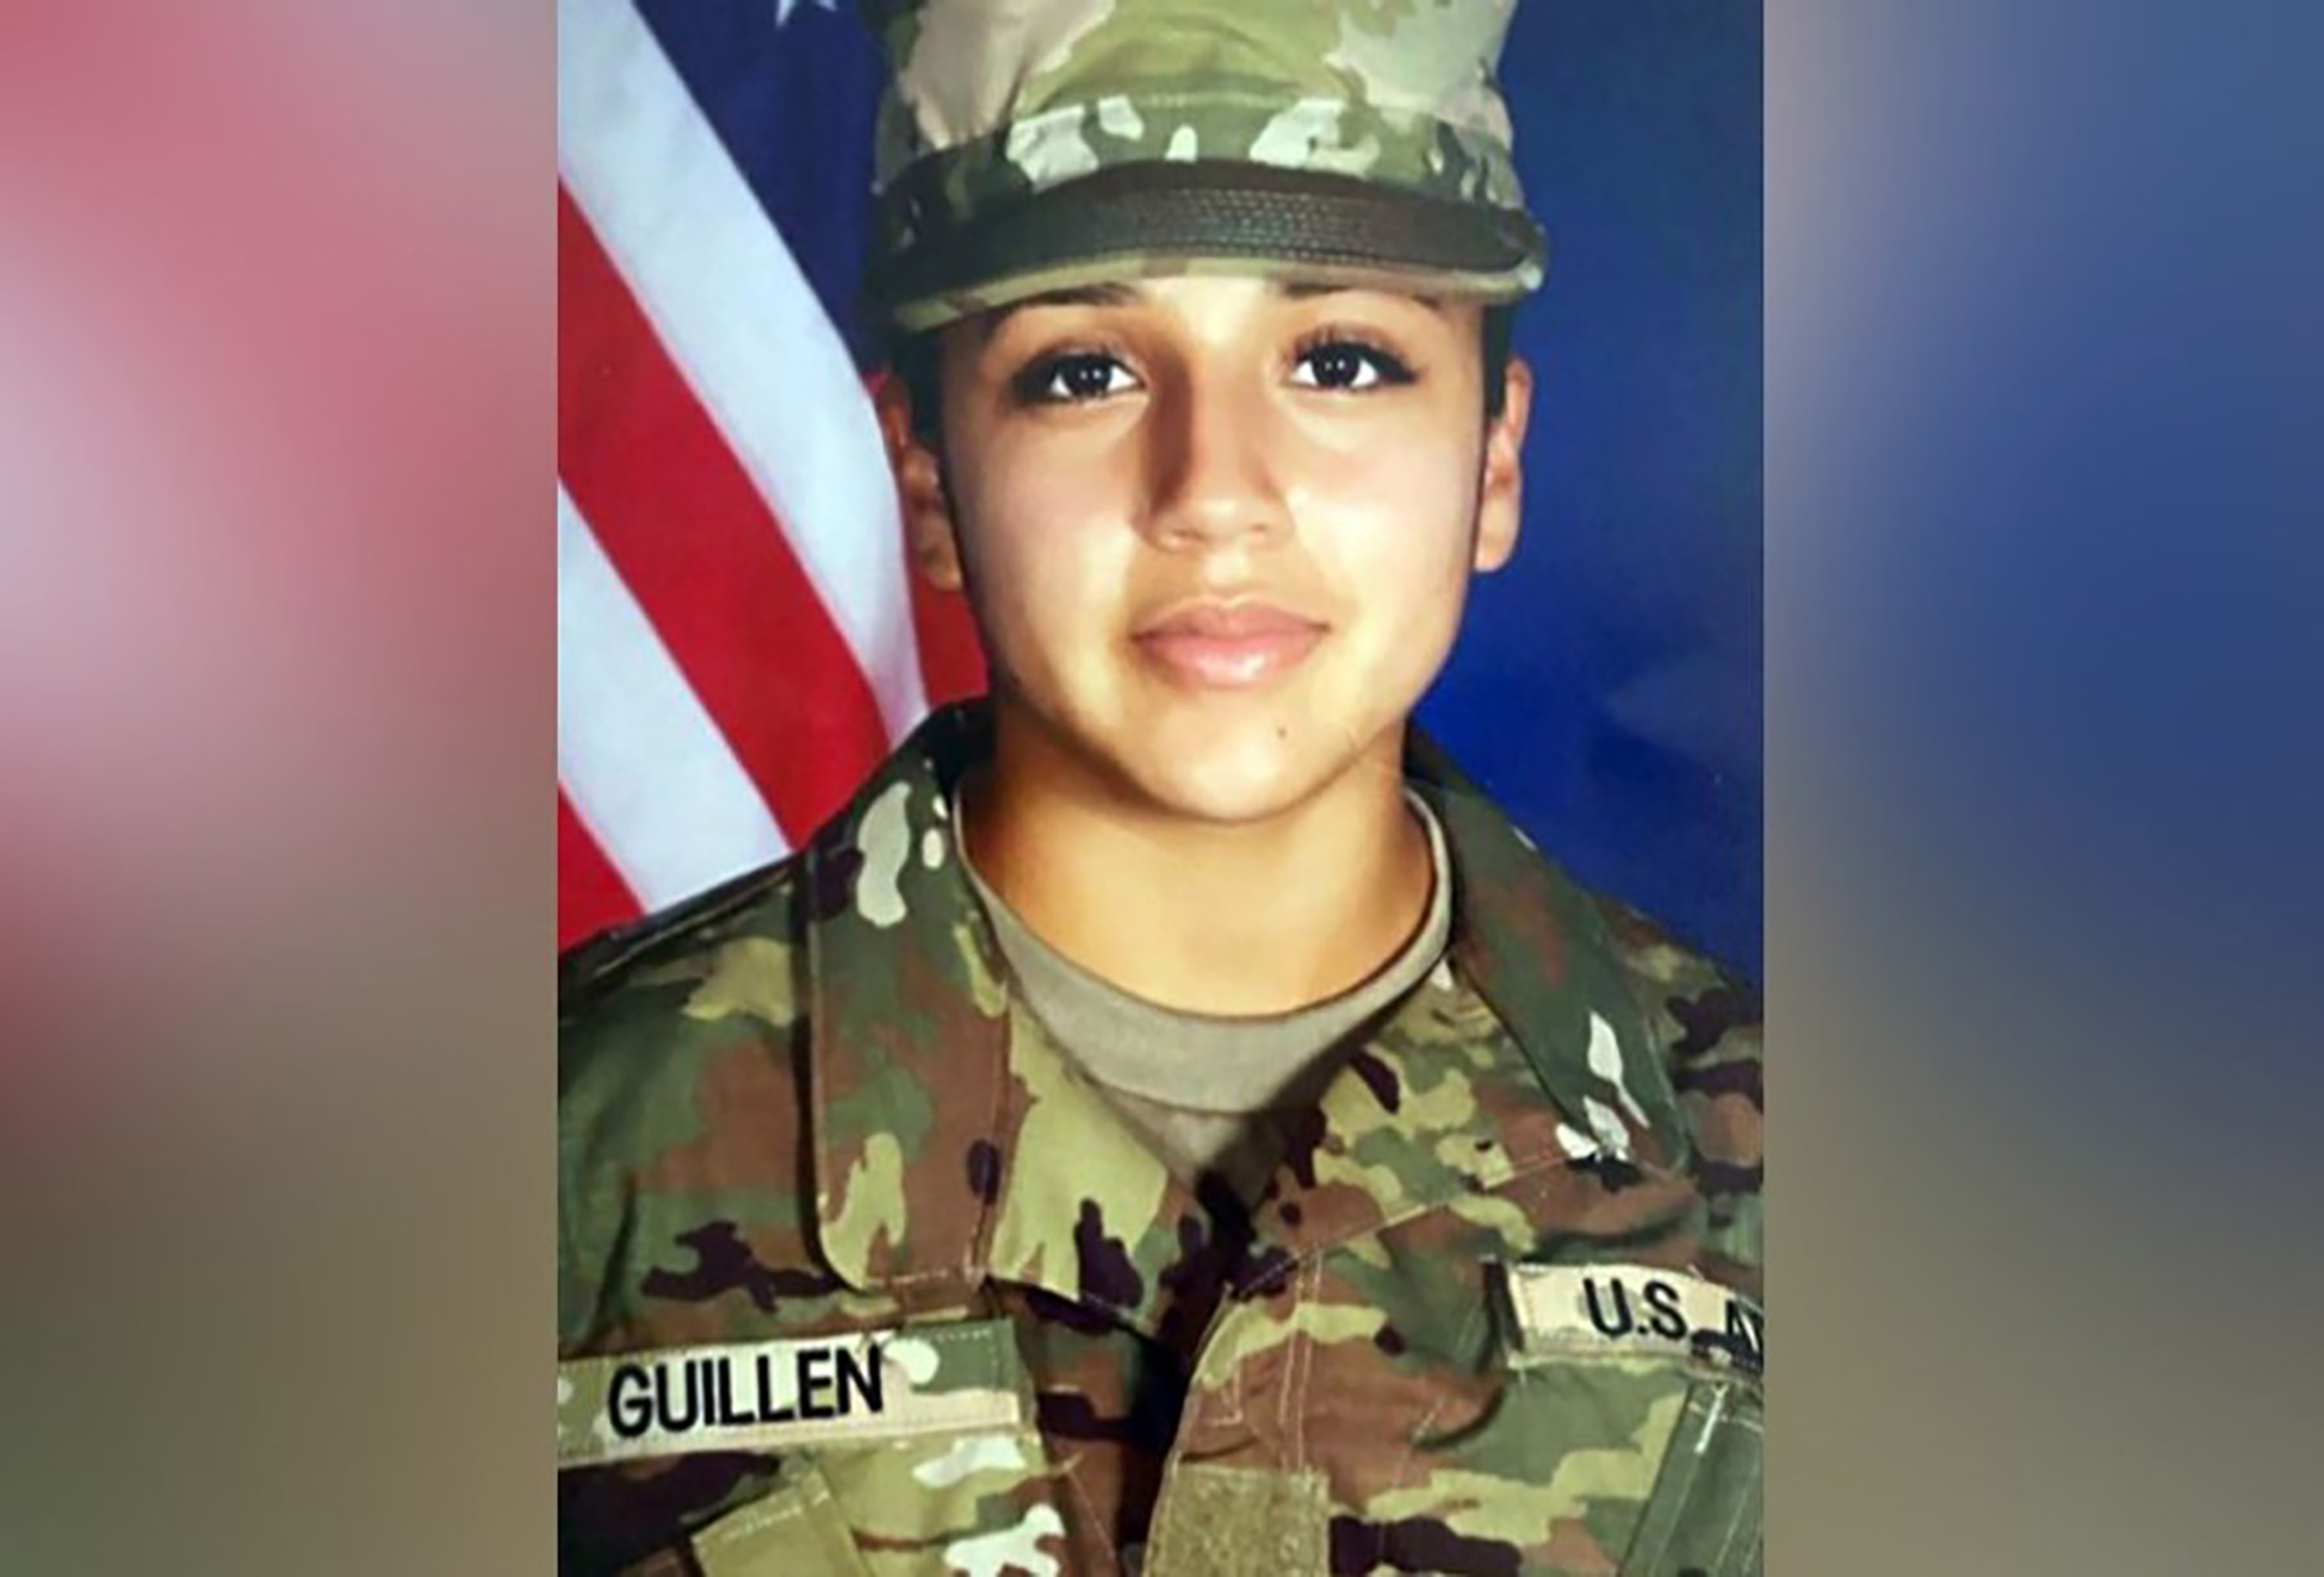 Army Pfc. Vanessa Guillen, 20, has been missing from her unit since April 22, 2020, according to the U.S. Army Criminal Investigation Command. (U.S. Army via The New York Times)